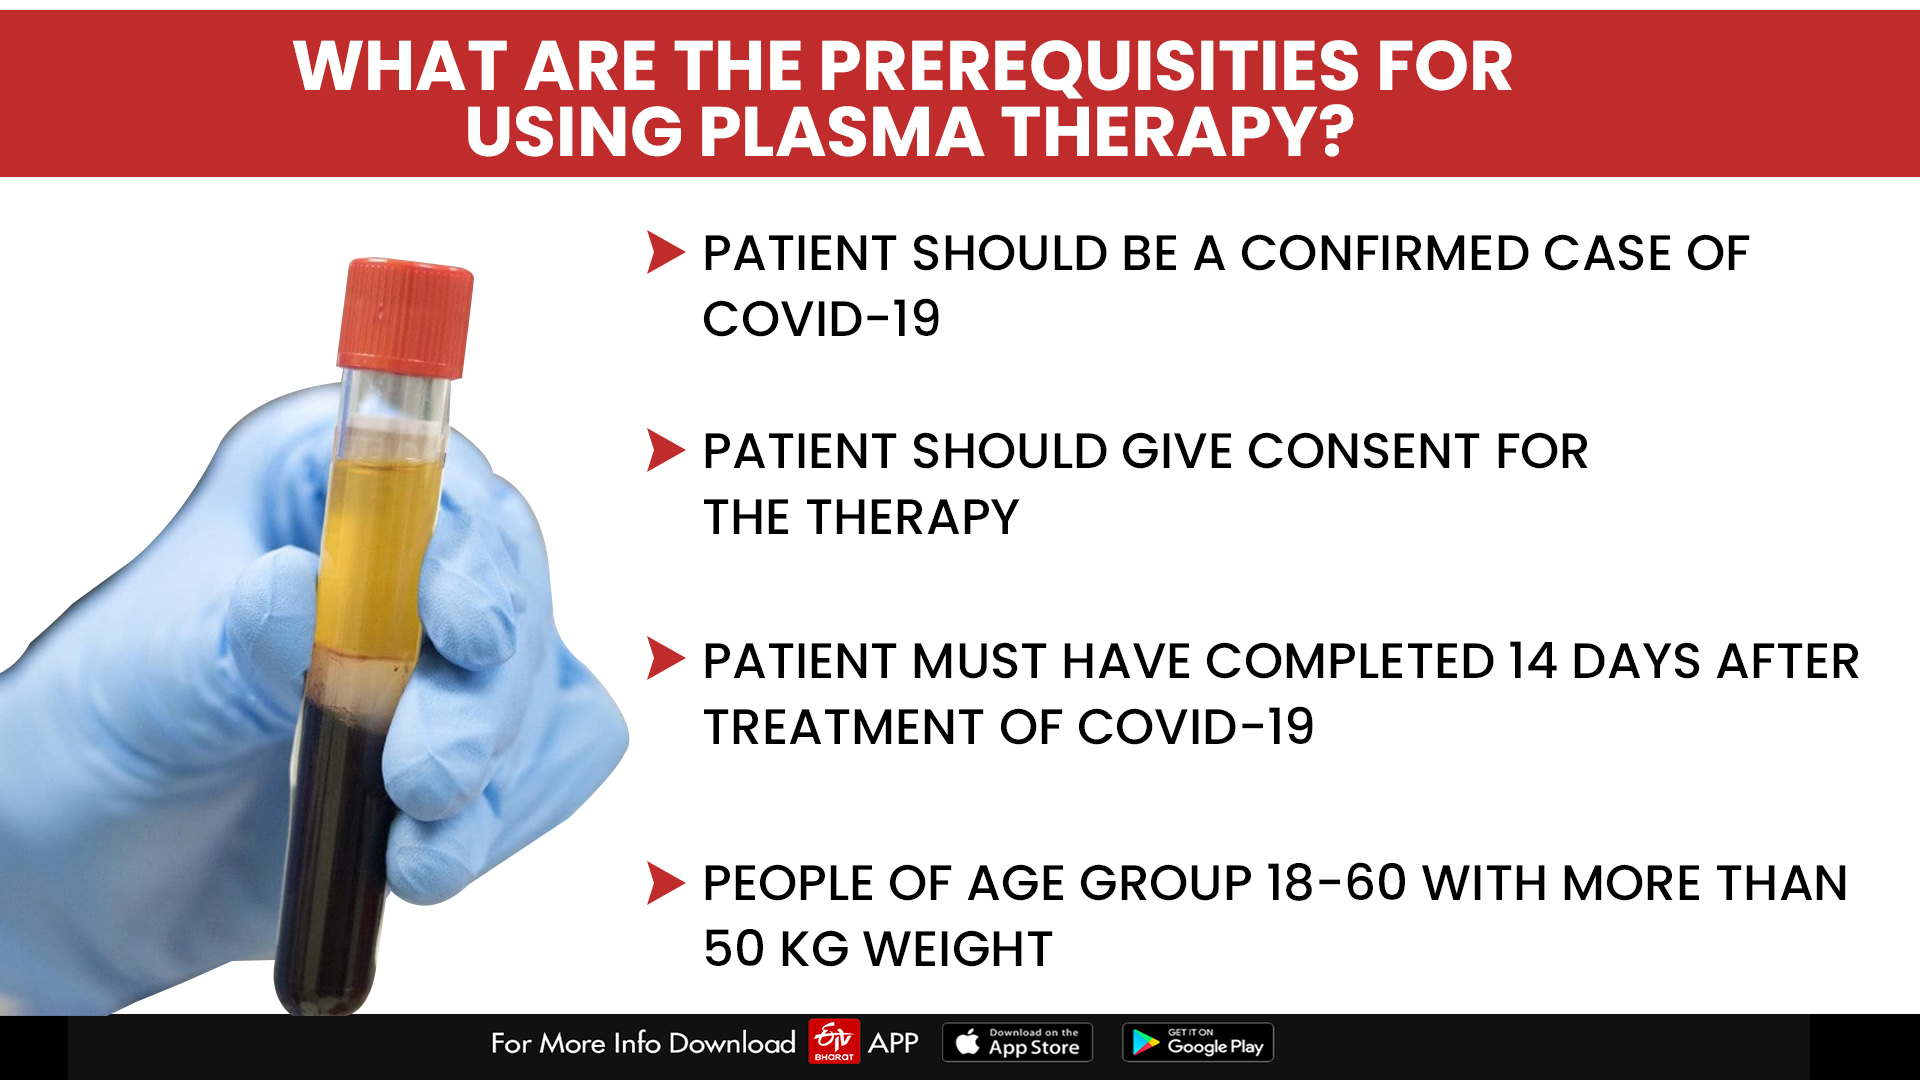 WHAT ARE THE PREREQUISITIES FOR USING PLASMA THERAPY?